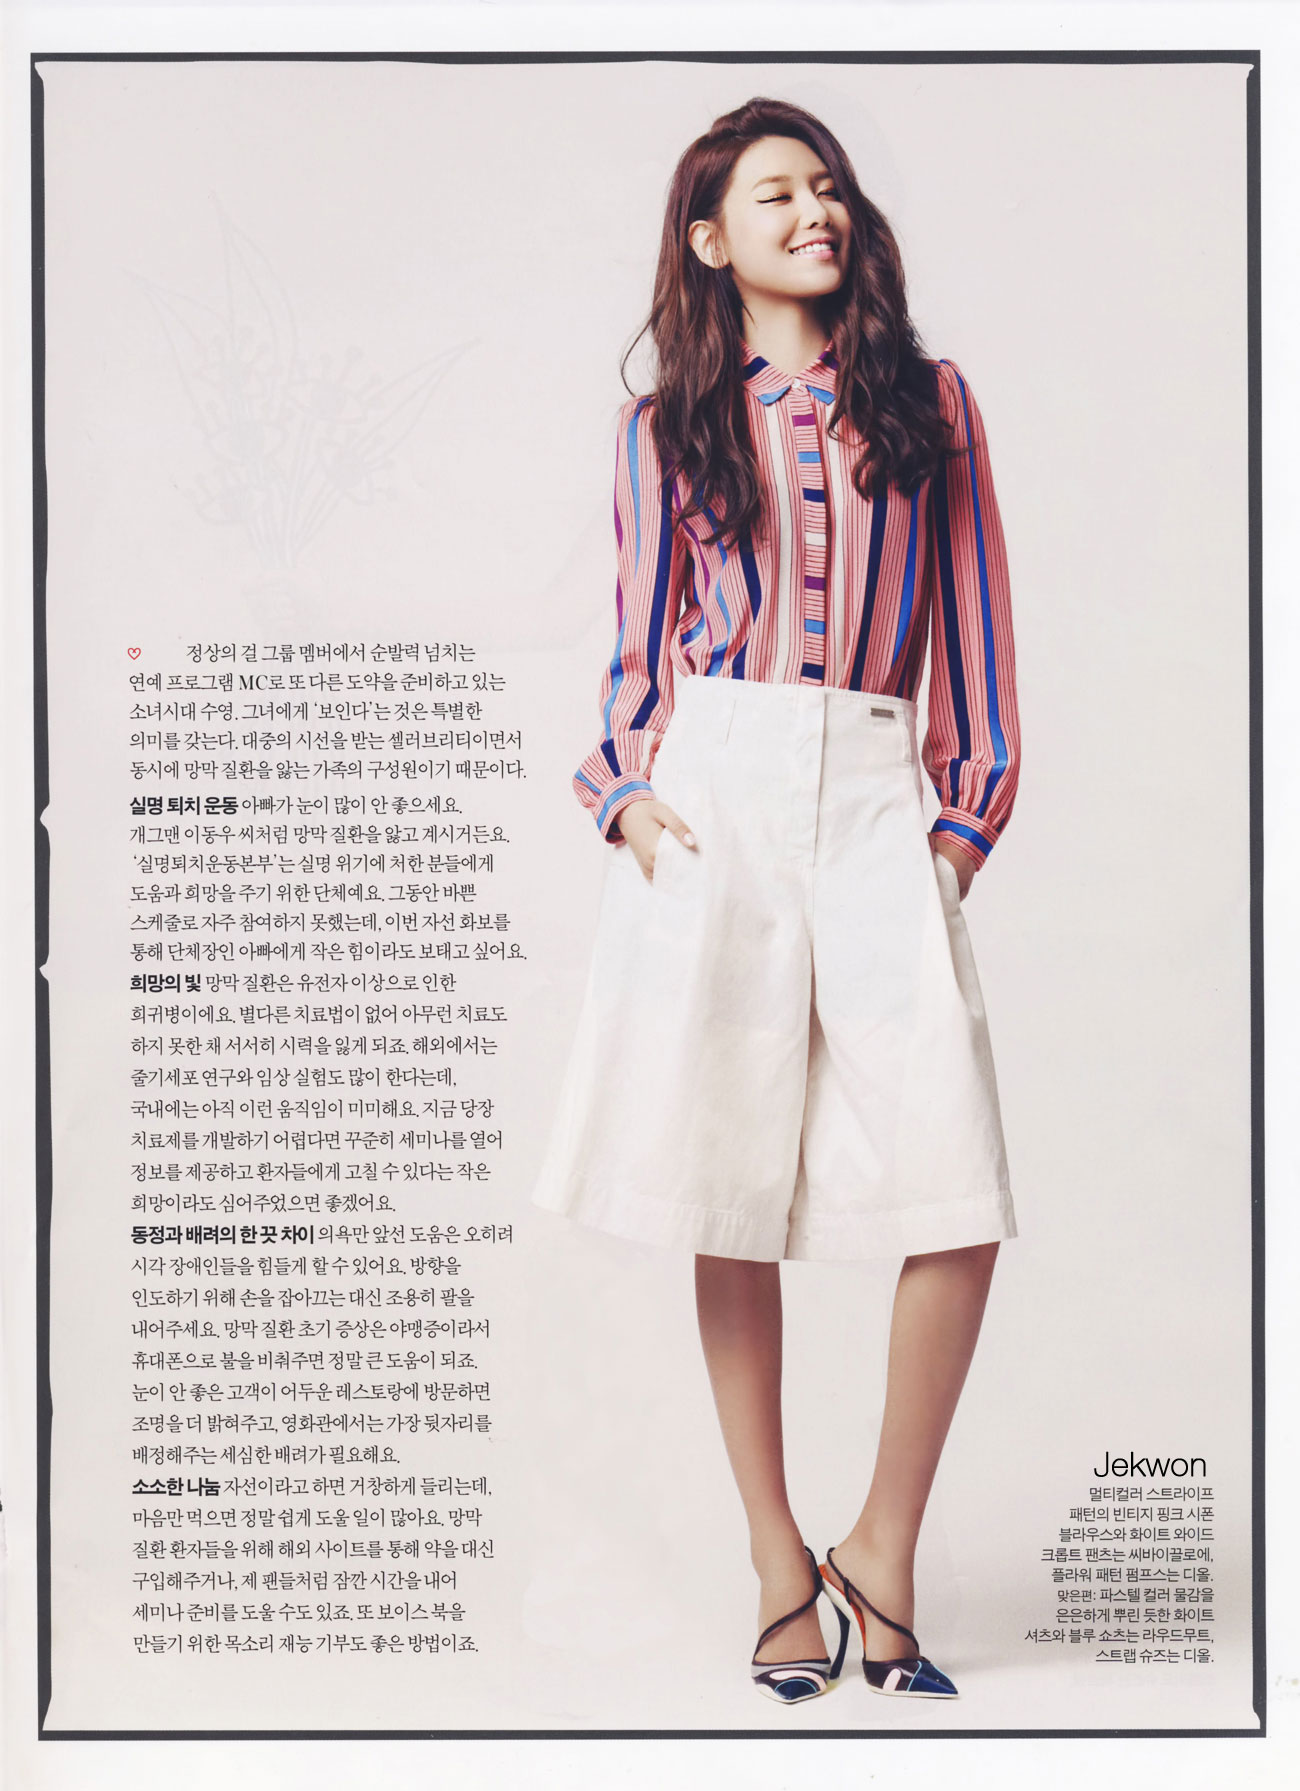 SNSD Sooyoung Instyle Magazine 2014